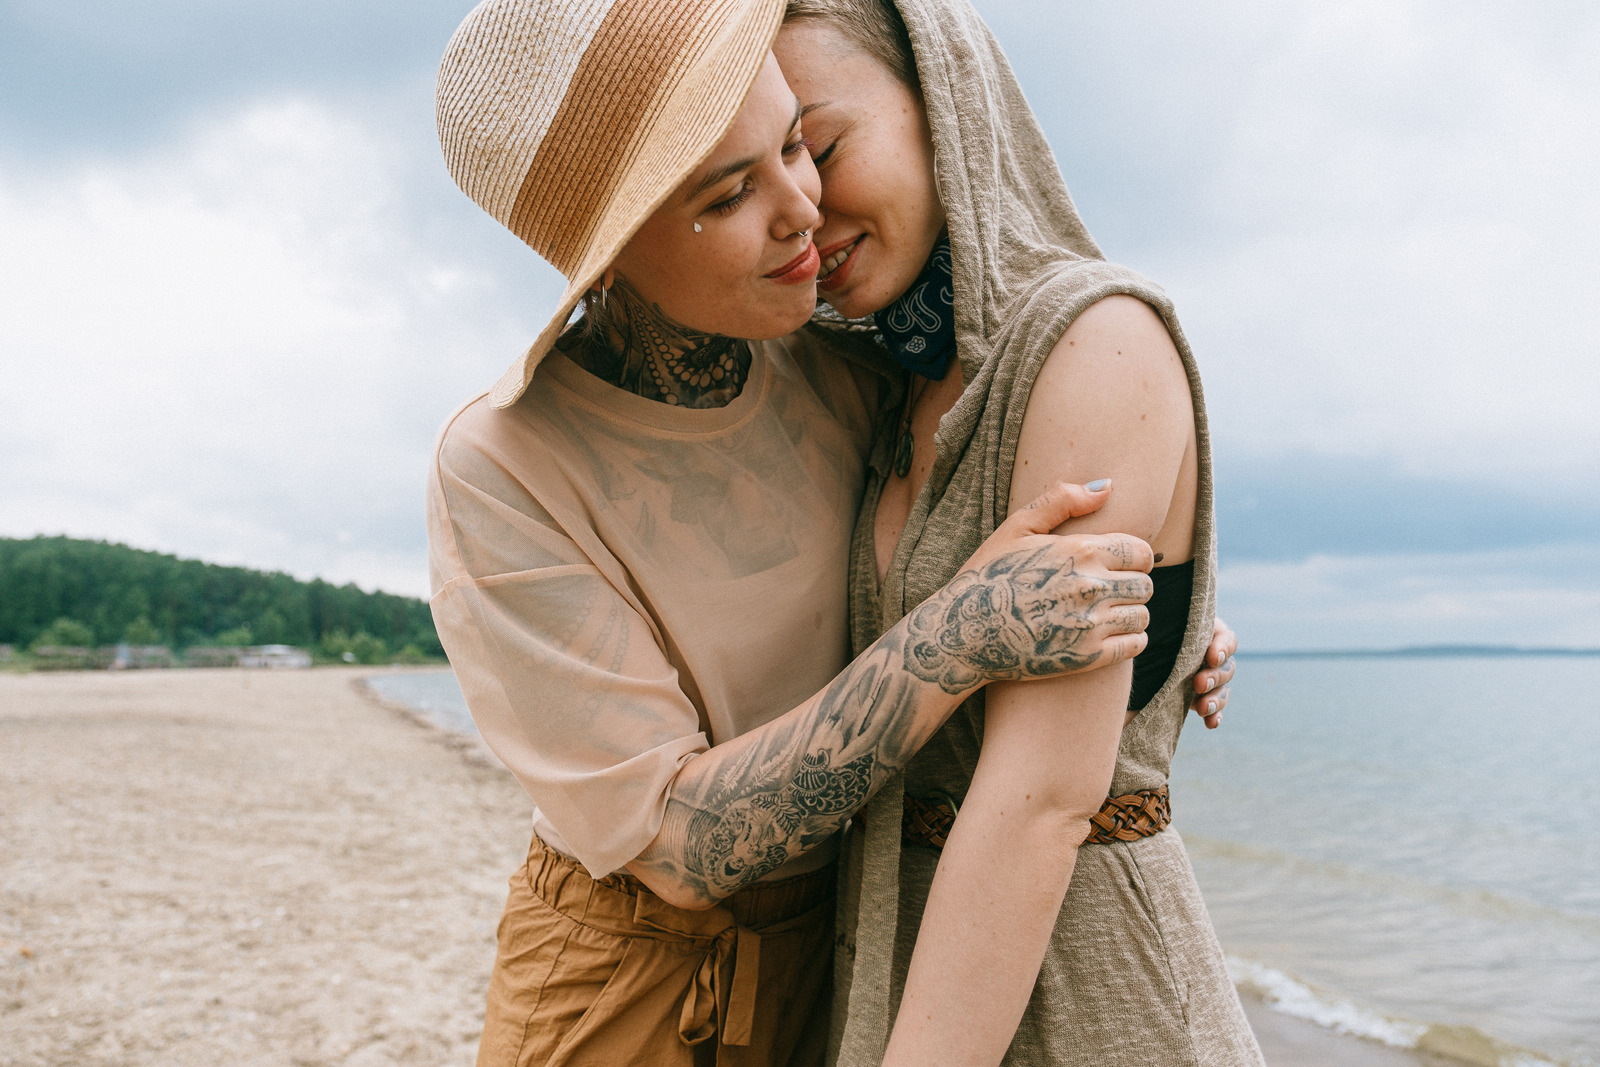 Woman Hugging Another Woman Photos By Canva 